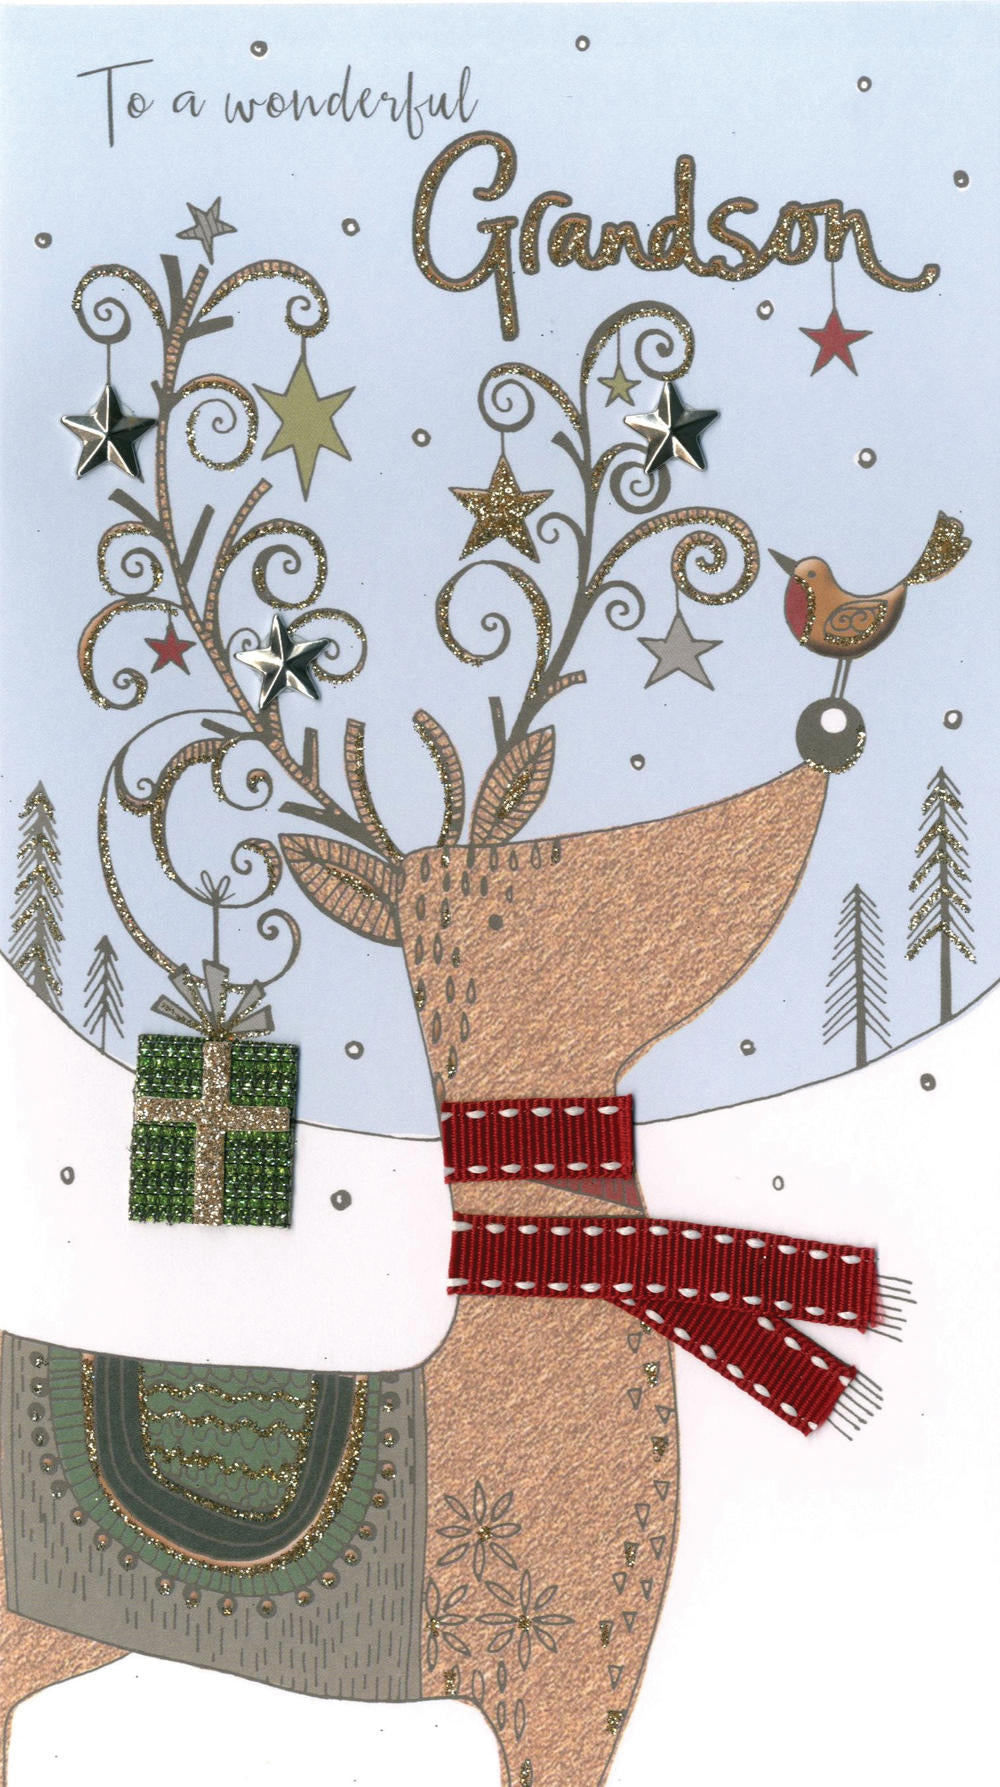 alt="Quality hand-finished, glitter embellished Grandson Christmas Reindeer greeting card by Second Nature sealed in a protective wrapping complete with envelope"